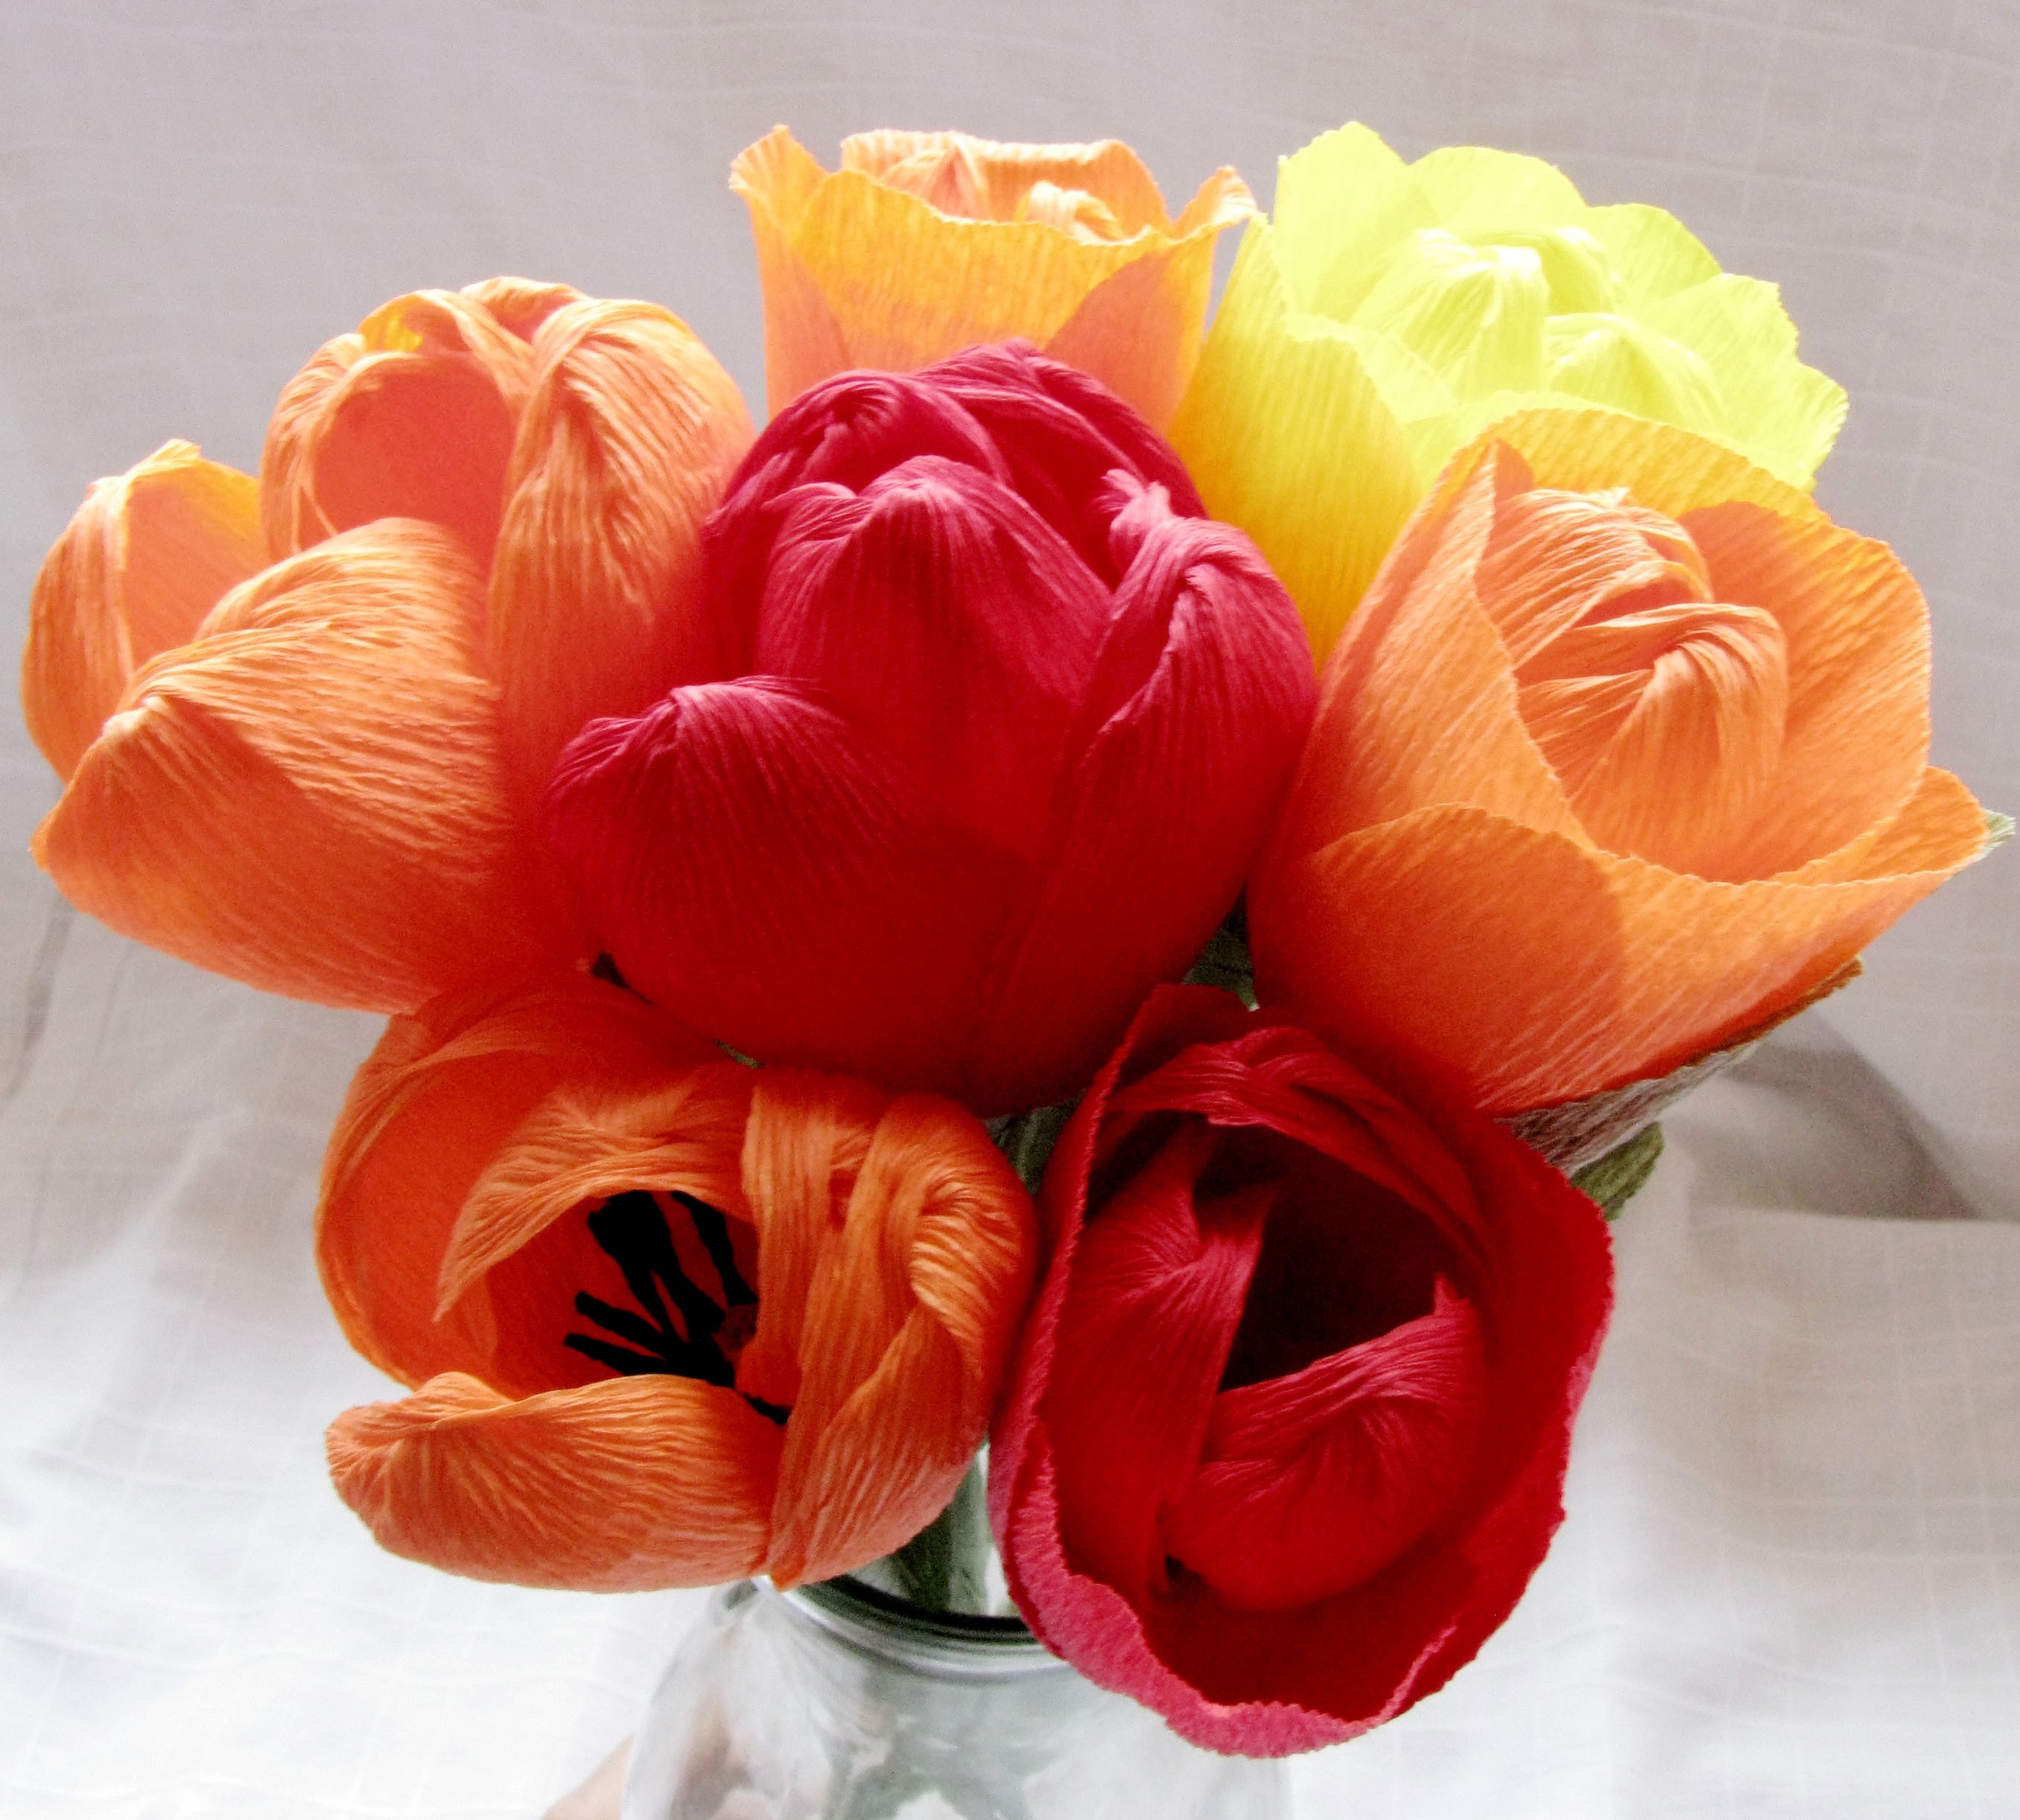 7 pcs tulips made of crepe paper with high quality.